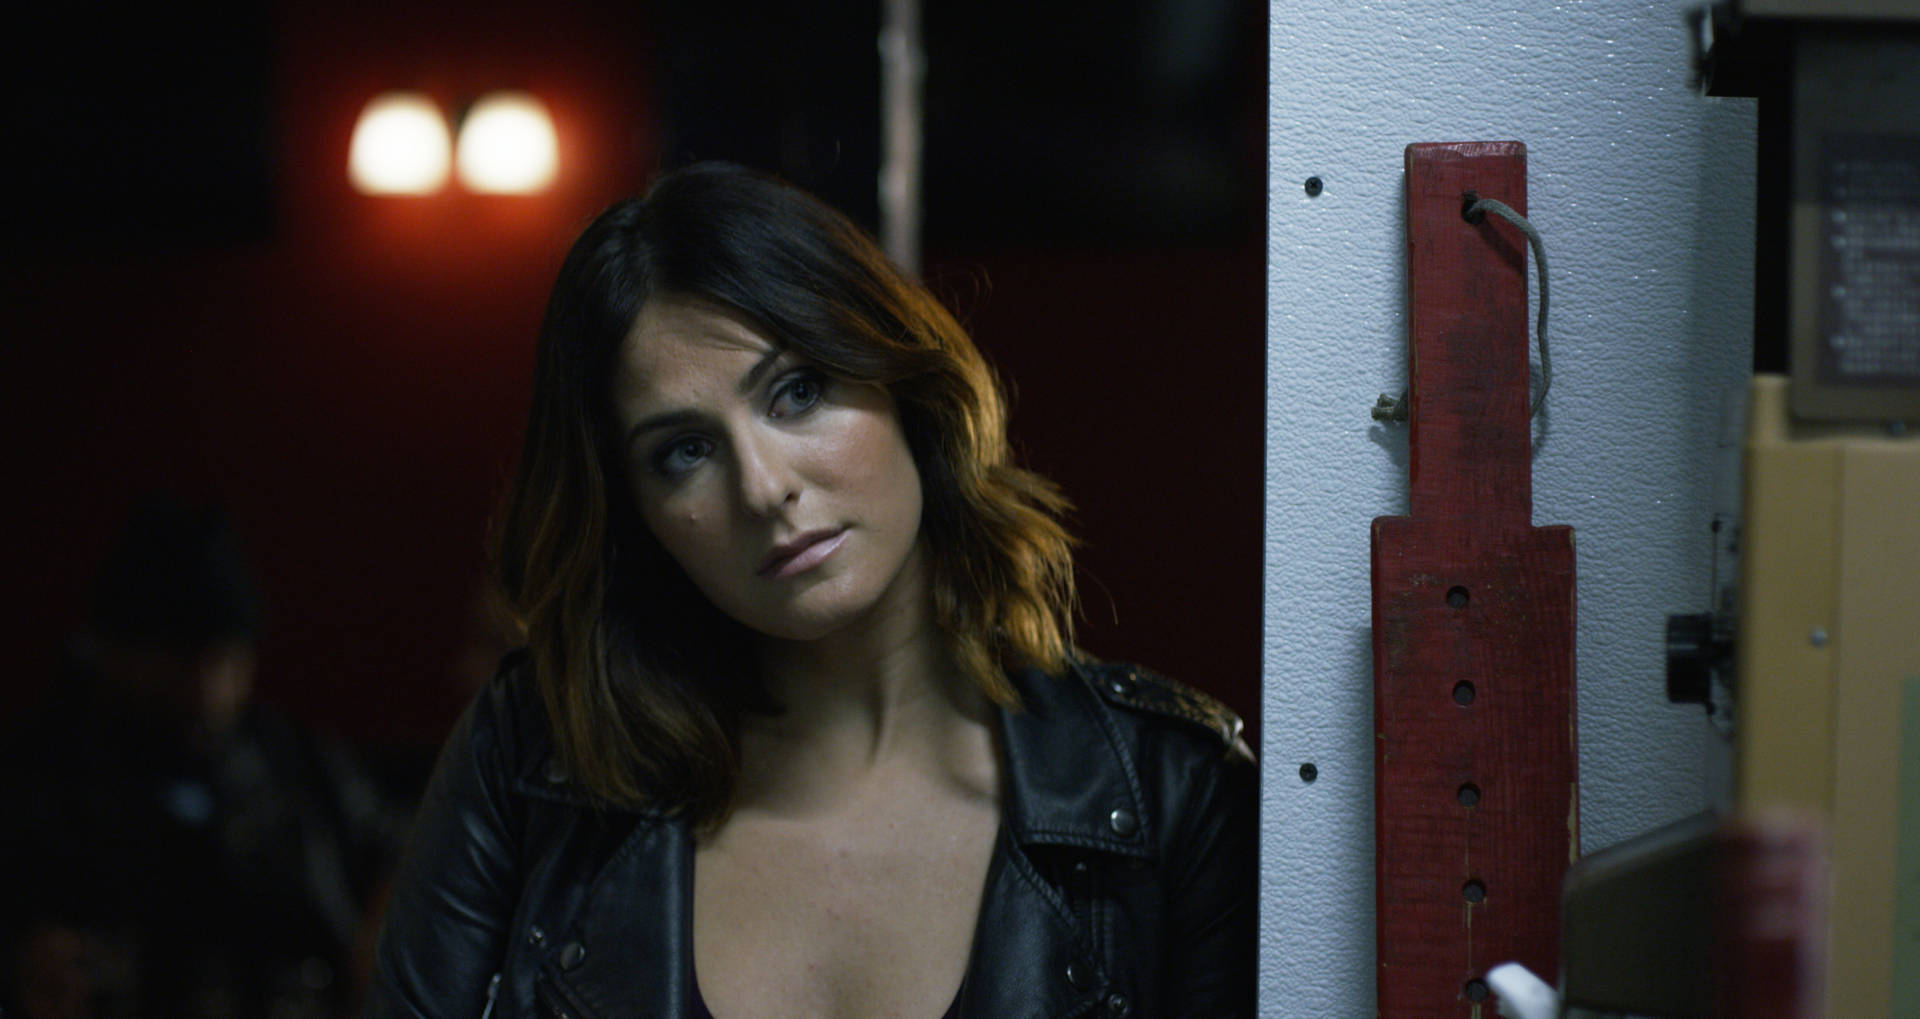 Scouttaylor-compton Abducted Film Would Be Translated To Scout Taylor-compton Bortförd Film In Swedish. When It Comes To Computer Or Mobile Wallpaper, The Translation Could Be Used As The Title Of A Wallpaper Featuring Scout Taylor-compton From The Movie Abducted. Wallpaper